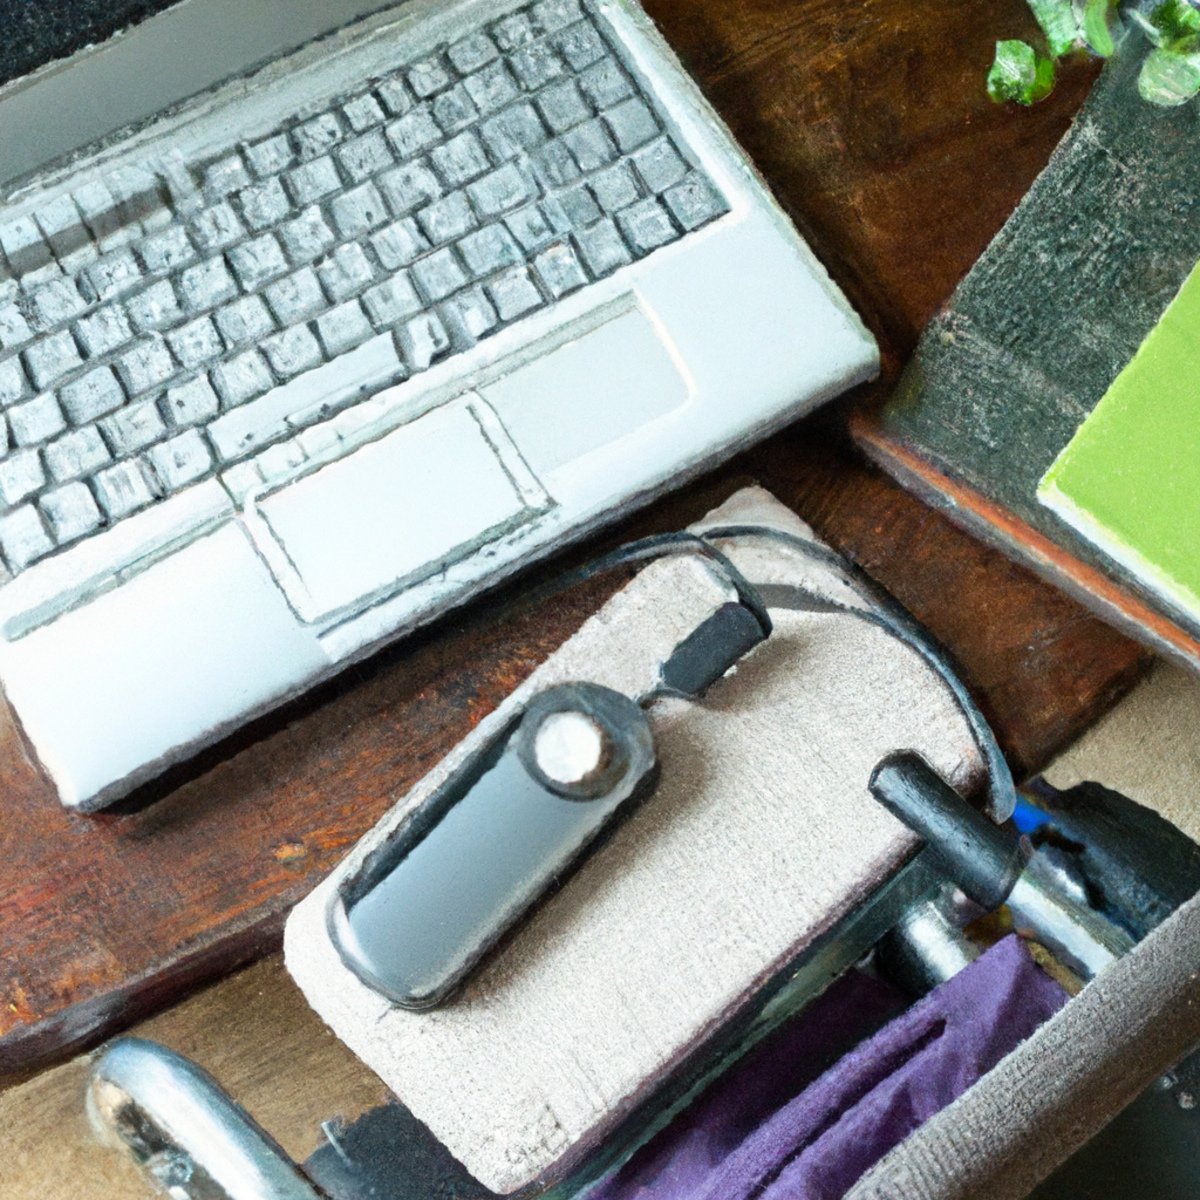 Assistive devices and tools for managing Ataxia Telangiectasia: wheelchair, keyboard, communication device, pill organizer, calendar, water bottle.